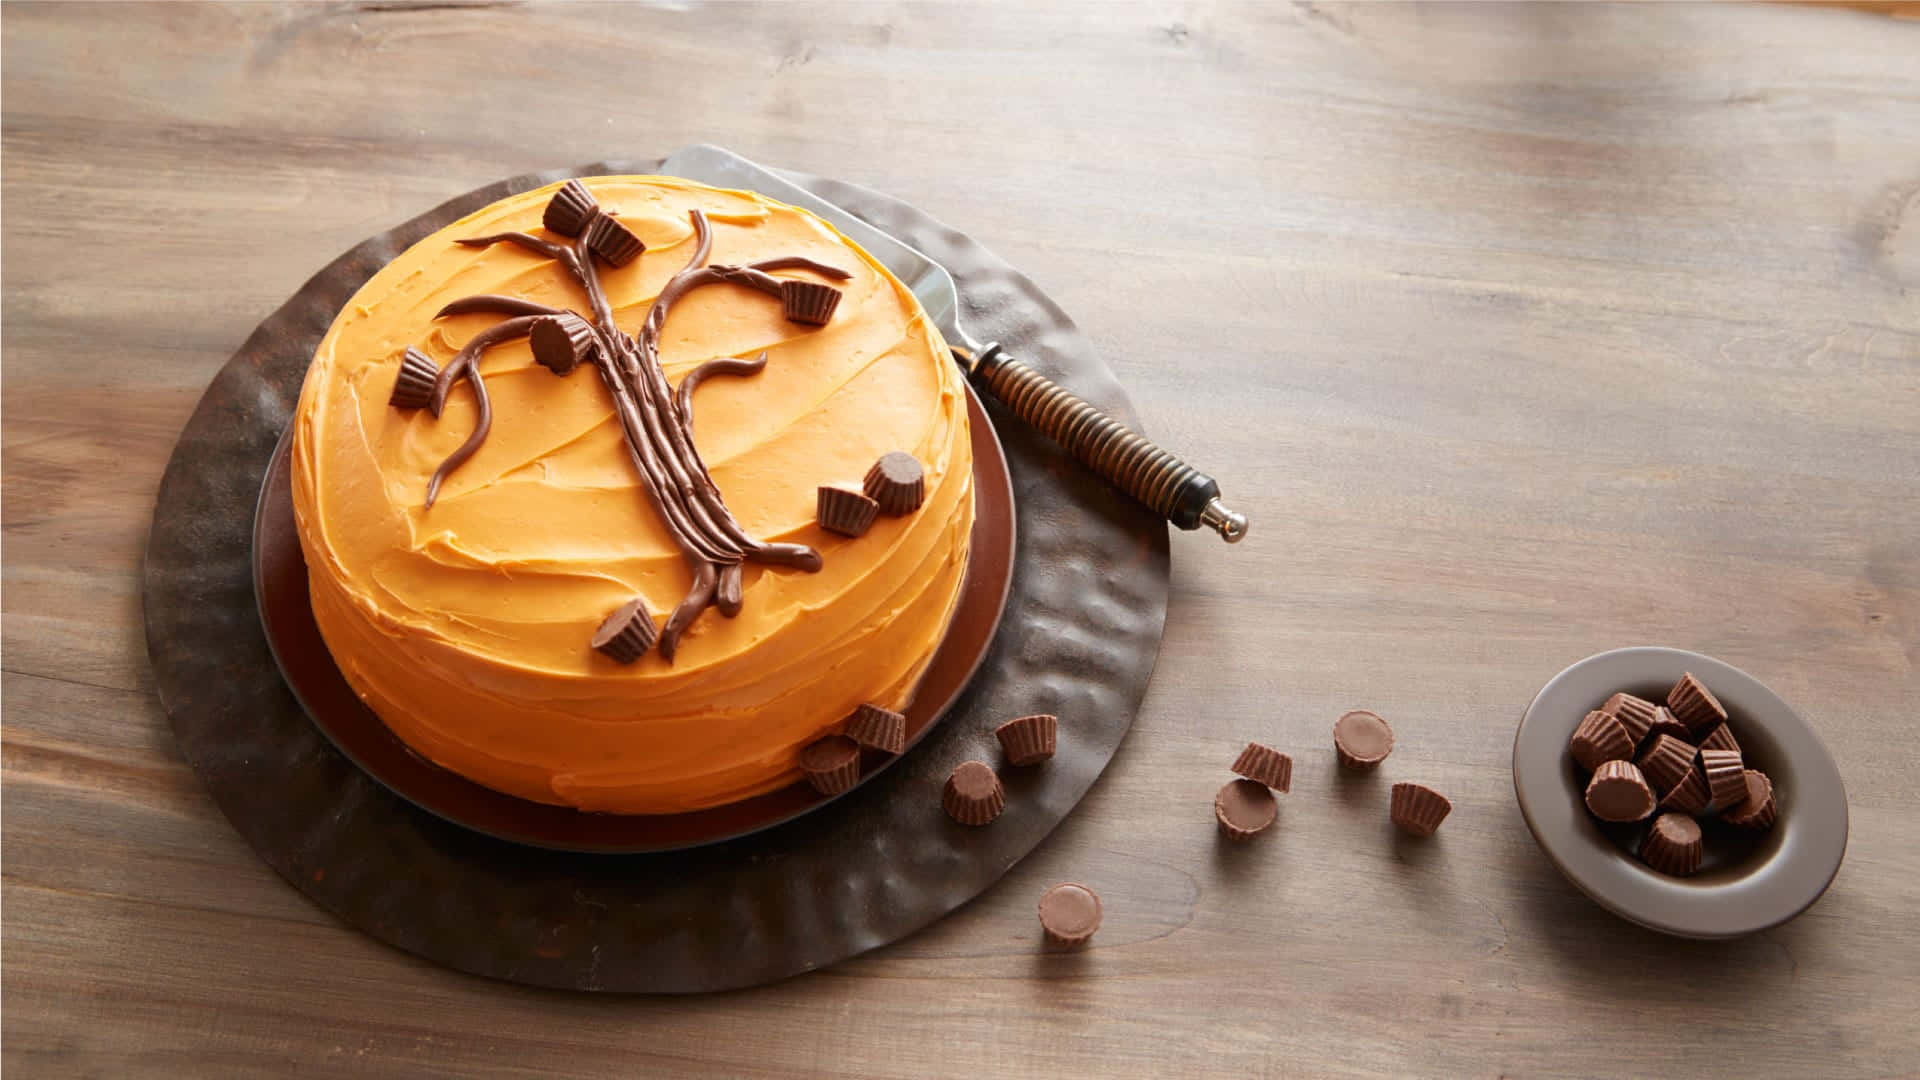 A mouthwatering treat this Halloween - a deliciously eerie cake! Wallpaper